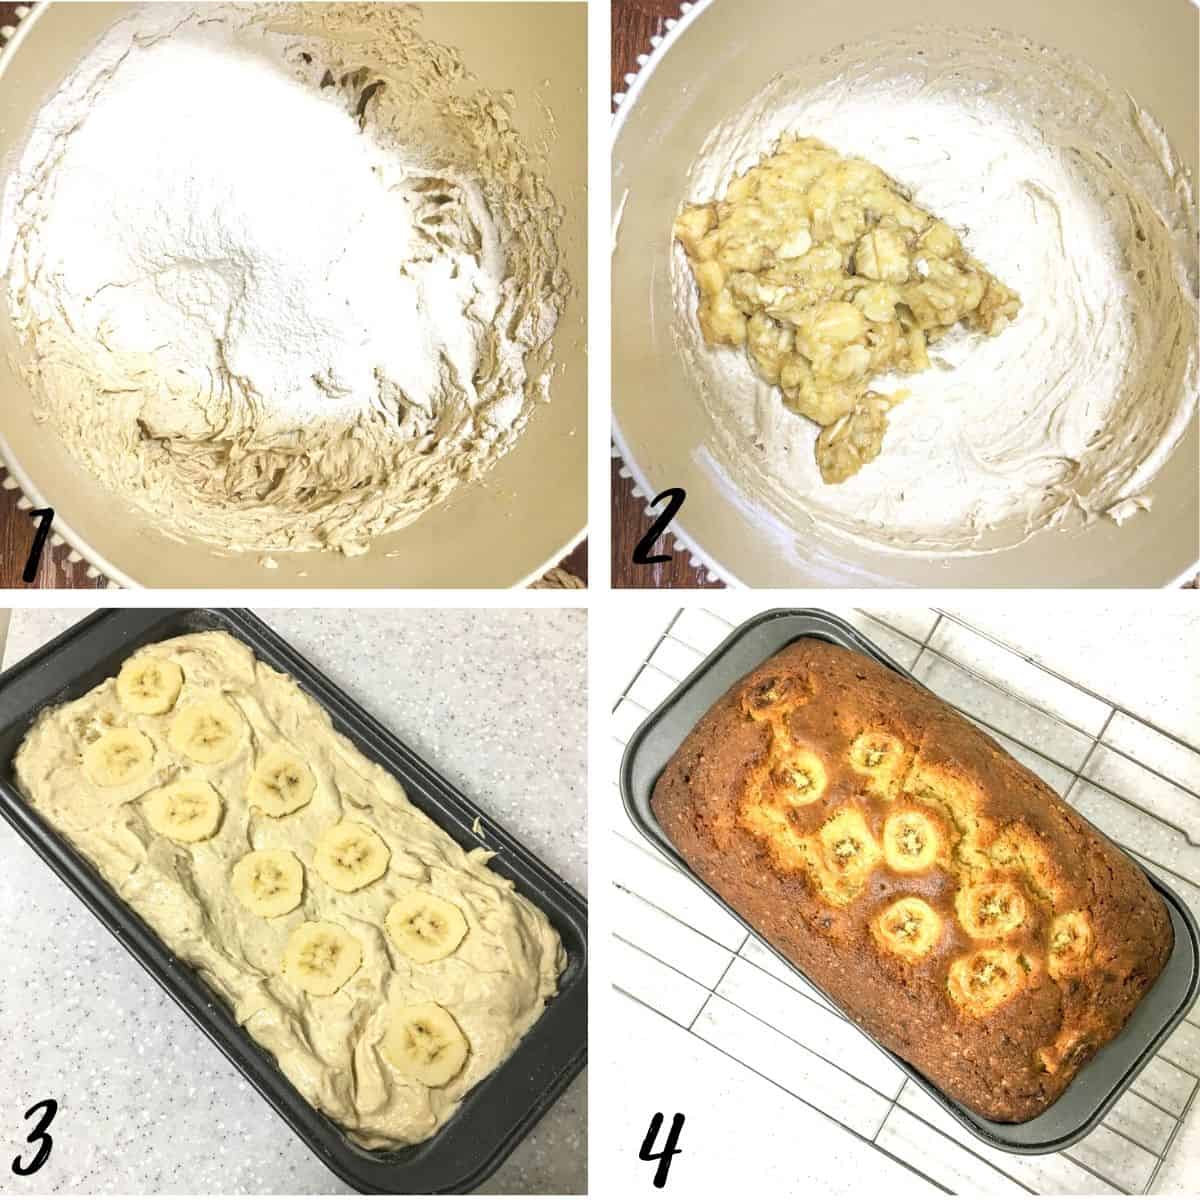 A poster of 4 images showing how to mix banana pound cake batter and fill it into a loaf pan